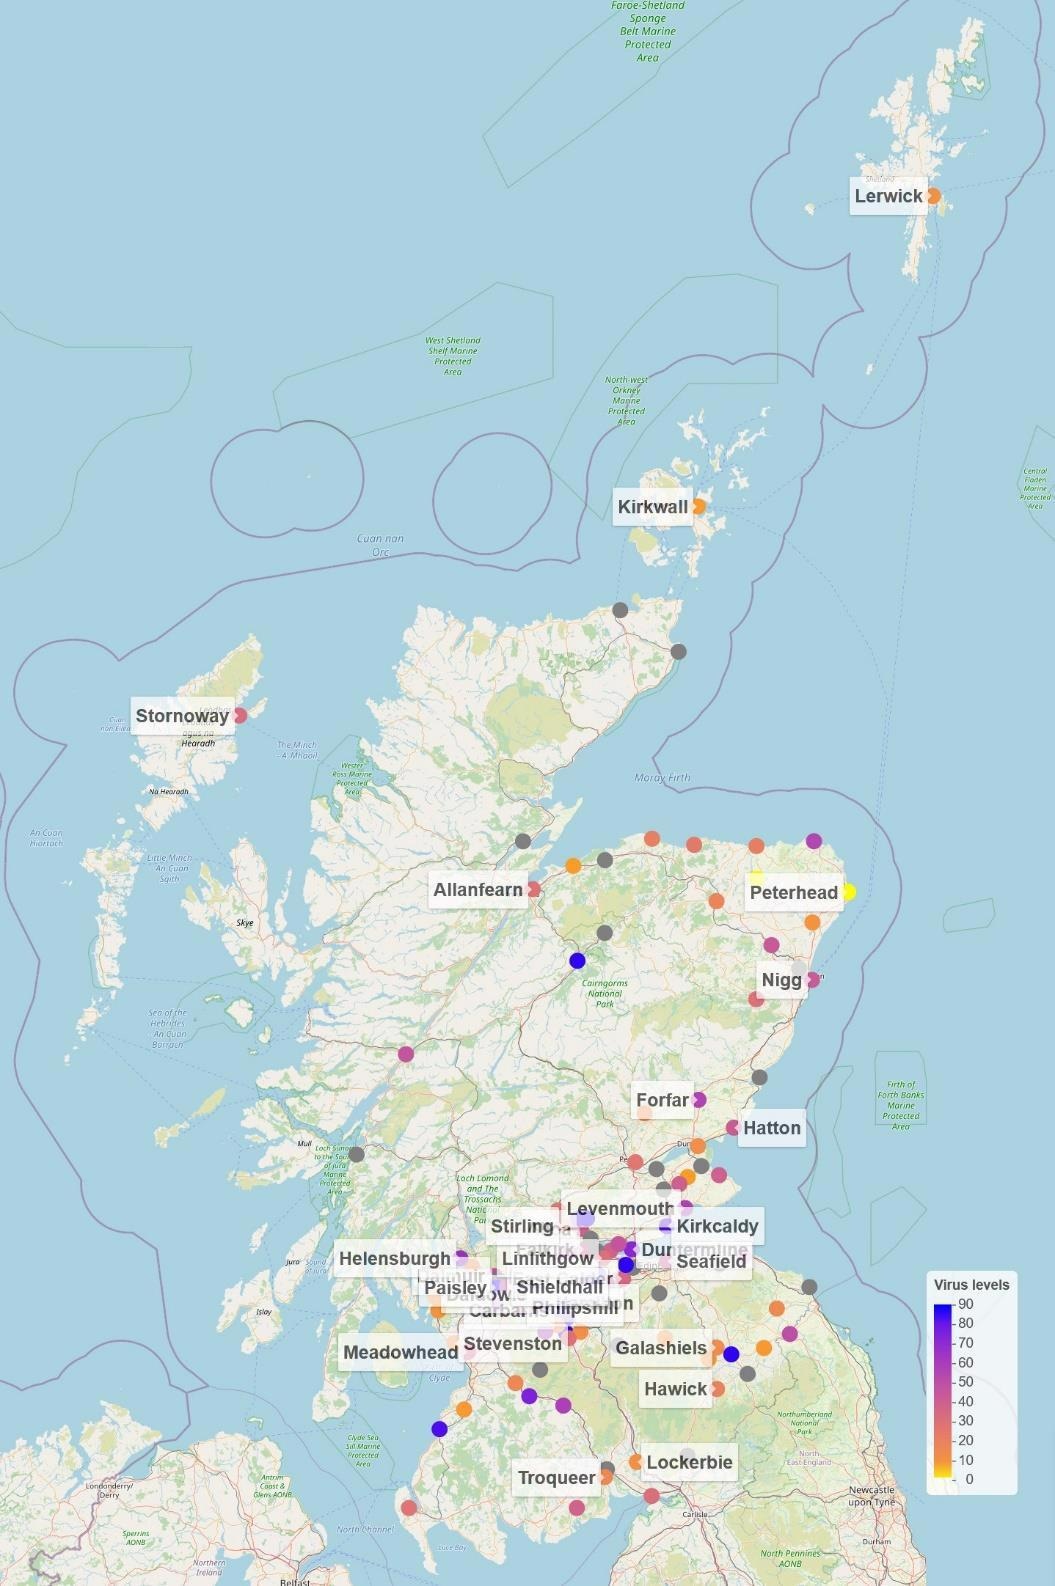 Map of Scotland showing sites from which wastewater samples were collected for SARS-CoV-2 analysis. The colored circles show normalized SARS-CoV-2 virus levels on the last week of July 2021 in Million gene copies per person per day ([Mgc/pD]; truncated to 90). The grey circles represent sites without measurement on that week. See Methods – Data visualization for further details.